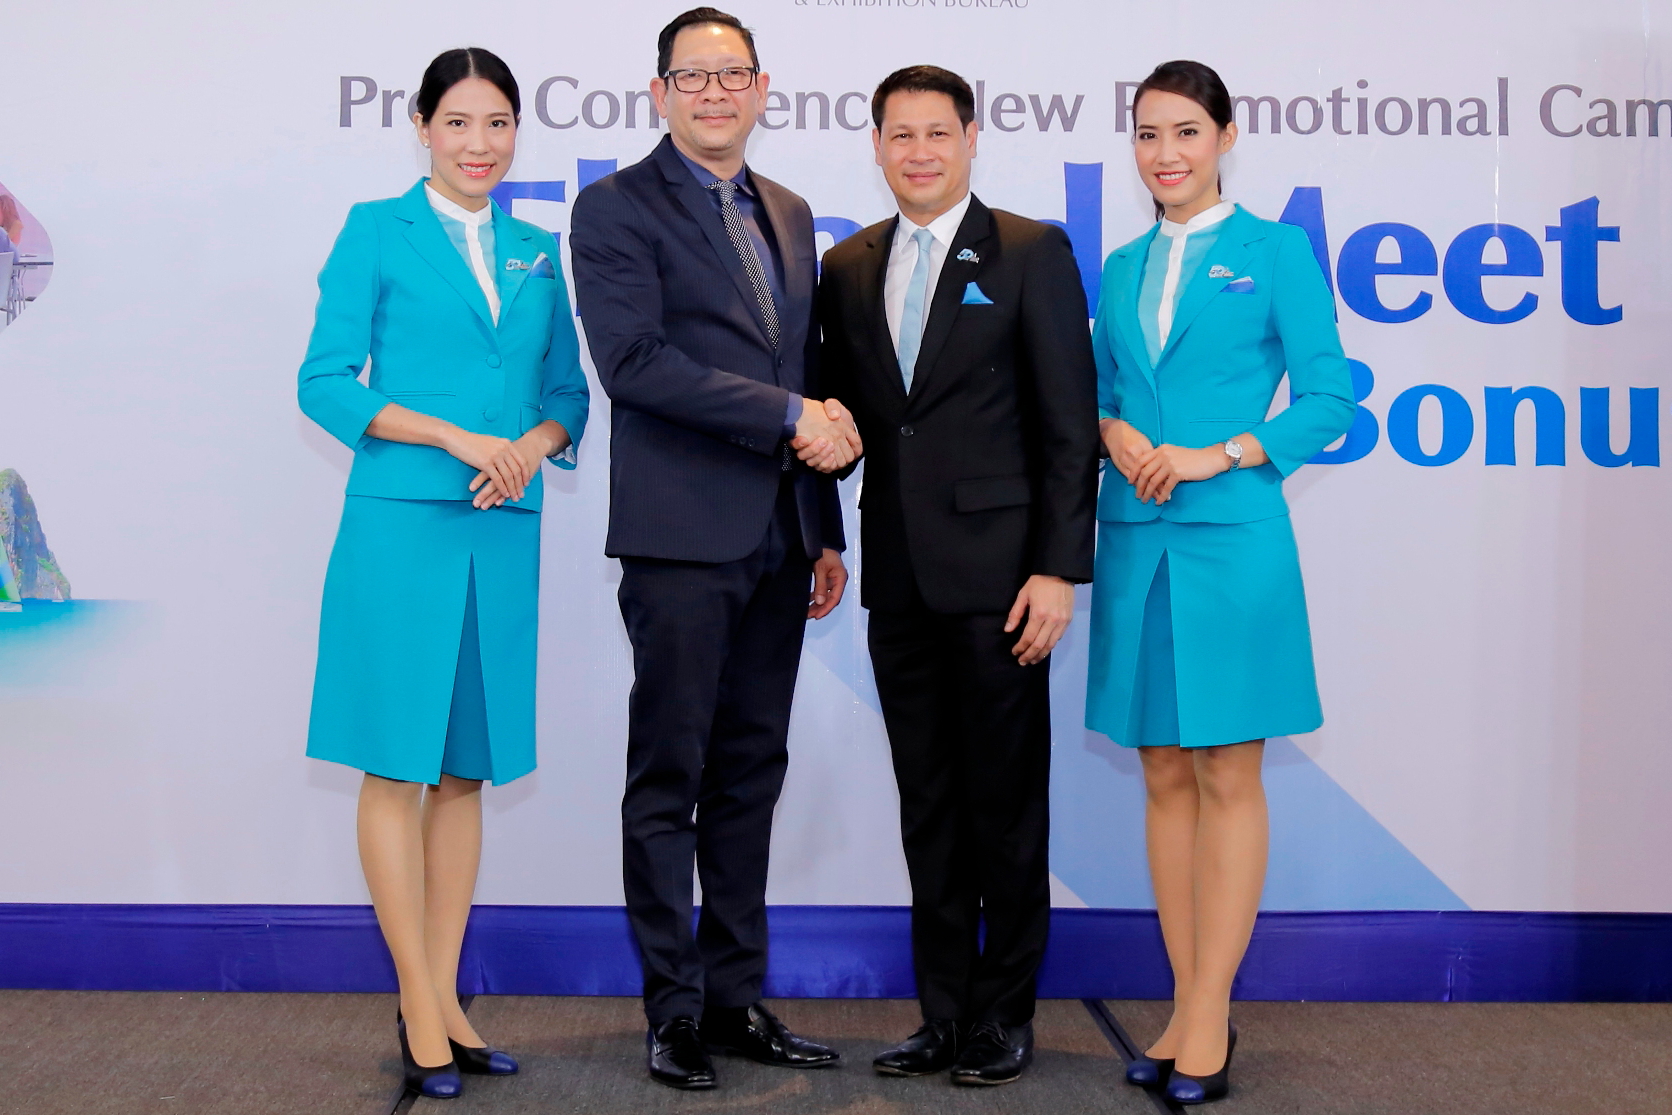 The 'Fly and Meet Double Bonus' promotion for Myanmar was launched by Bangkok Airway's Vice President - Sales, Mr. Varong Israsena Na Ayudhya (centre right), and TCEB's Director of President Office Department, Mr. Puripan Bunnag (centre left), at Chatrium Hotel in Yangon, Myanmar. Click to enlarge.